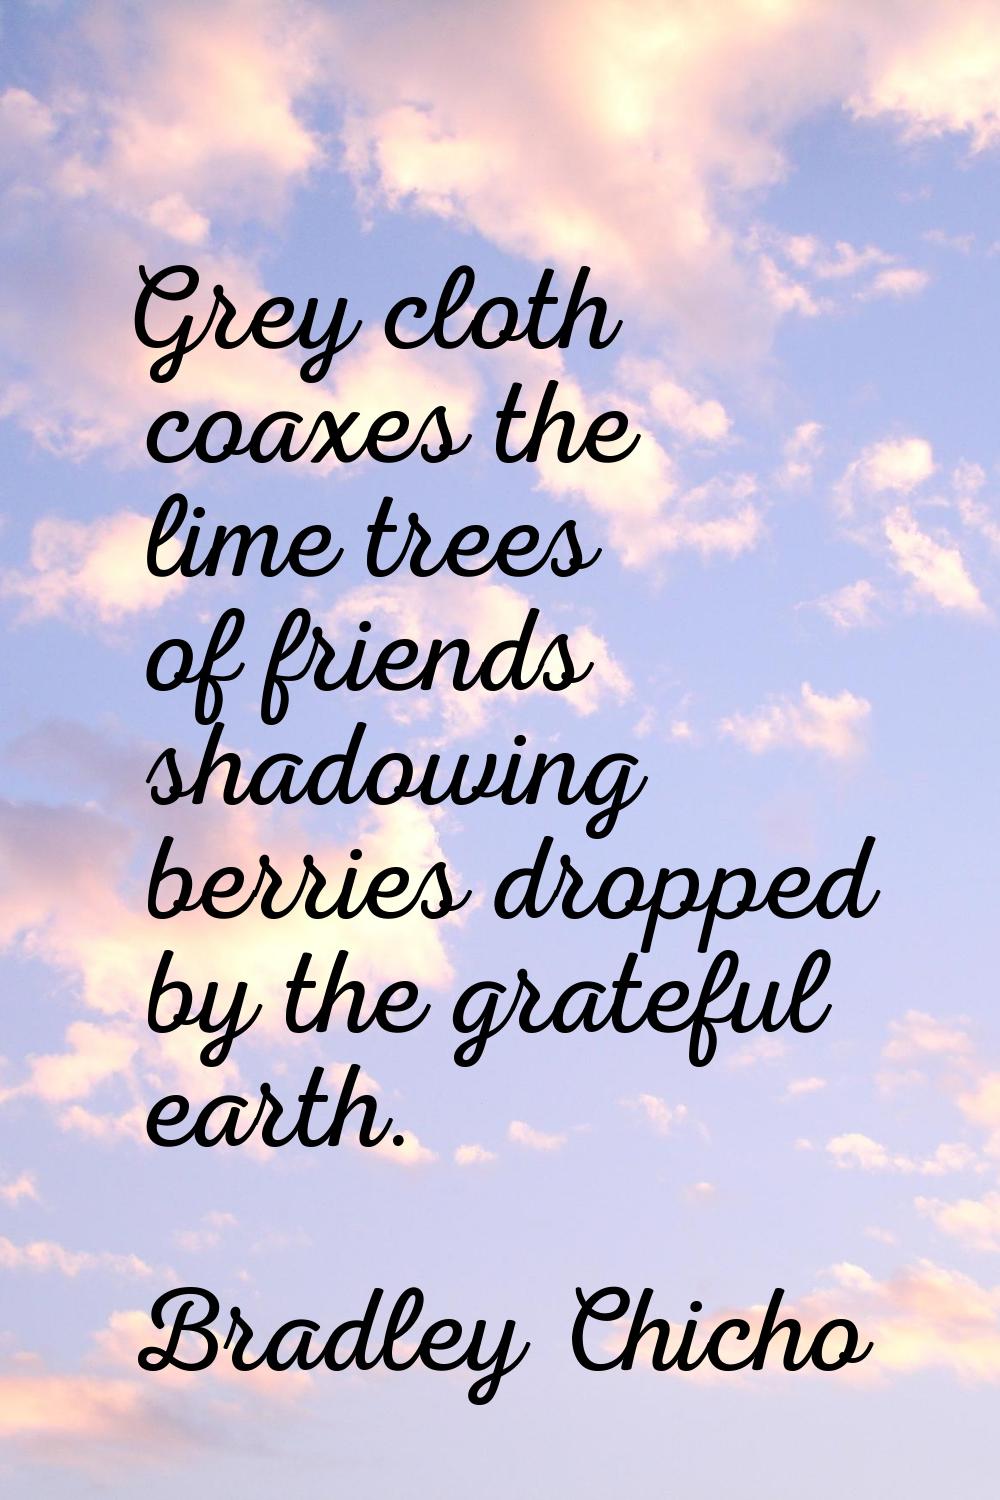 Grey cloth coaxes the lime trees of friends shadowing berries dropped by the grateful earth.